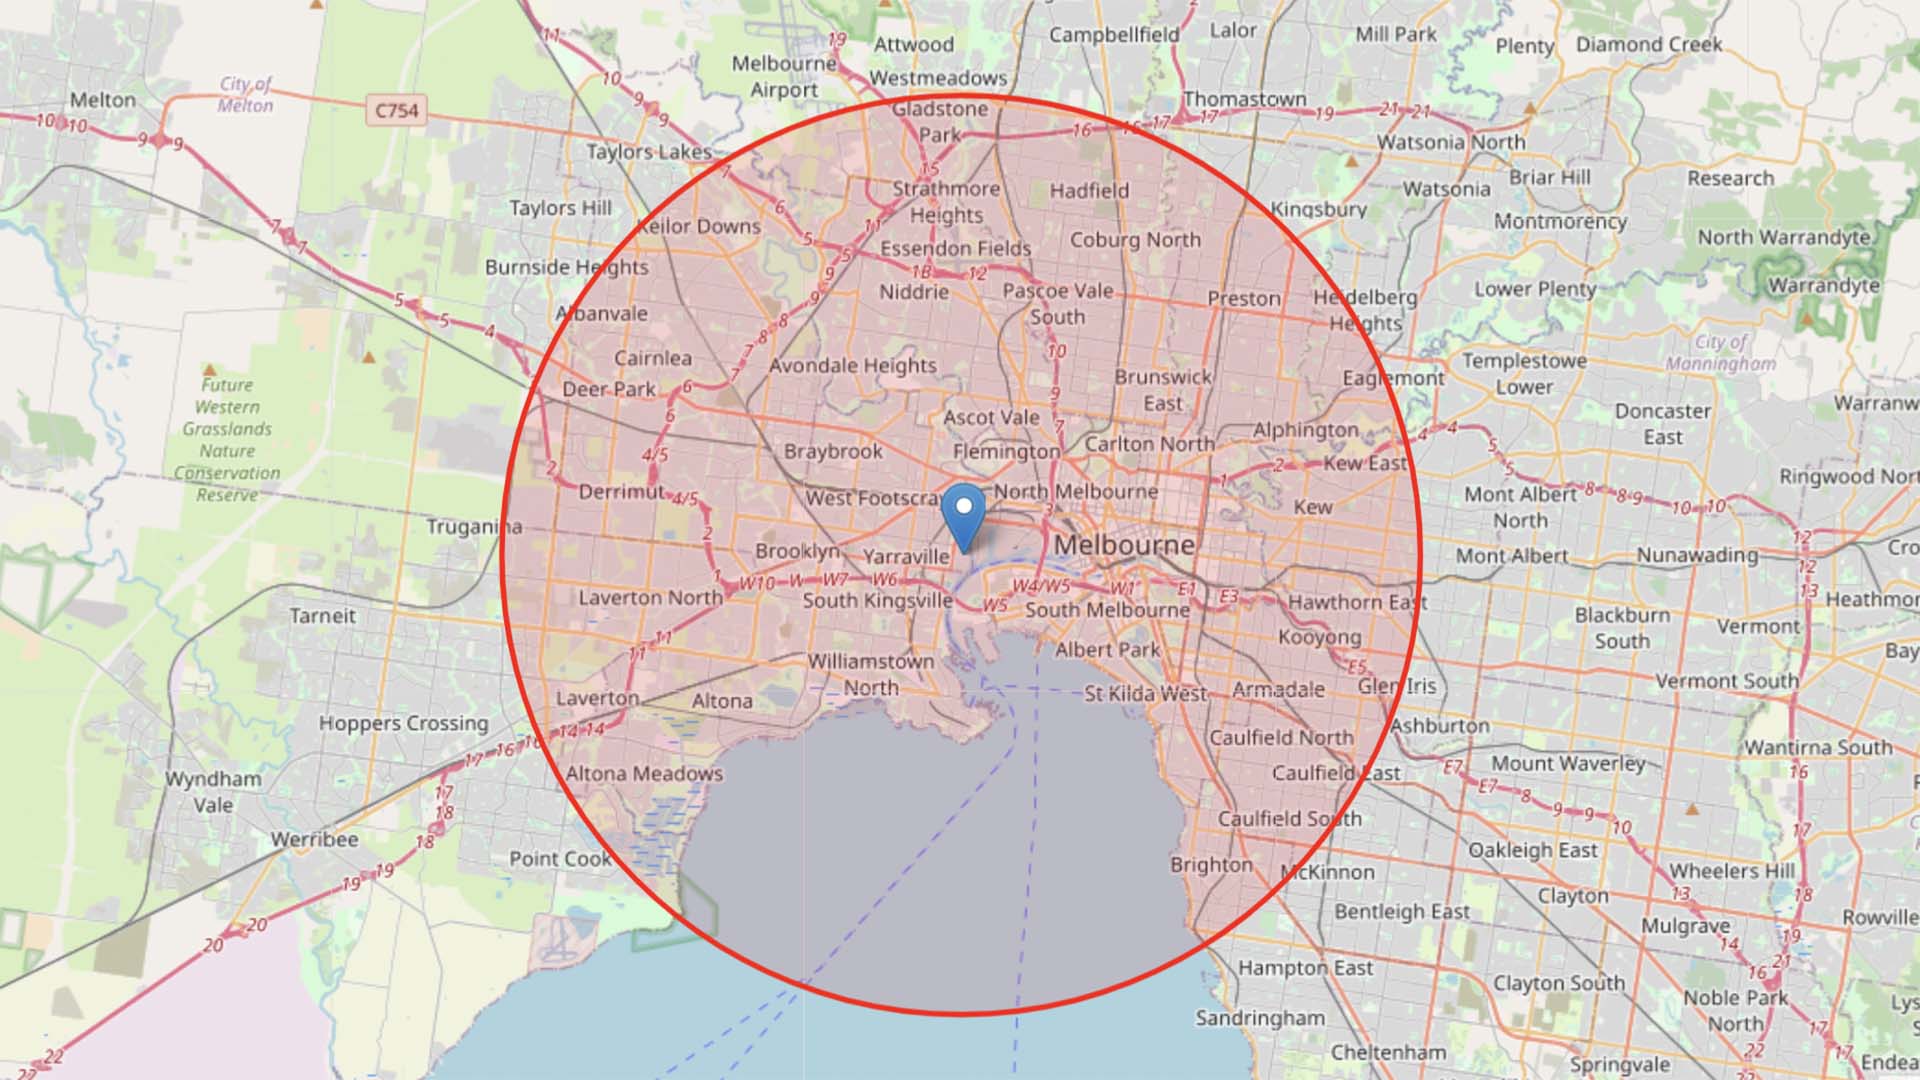 Here's How to Measure What Is 15 Kilometres From Your Home Under Melbourne's New Lockdown Rules